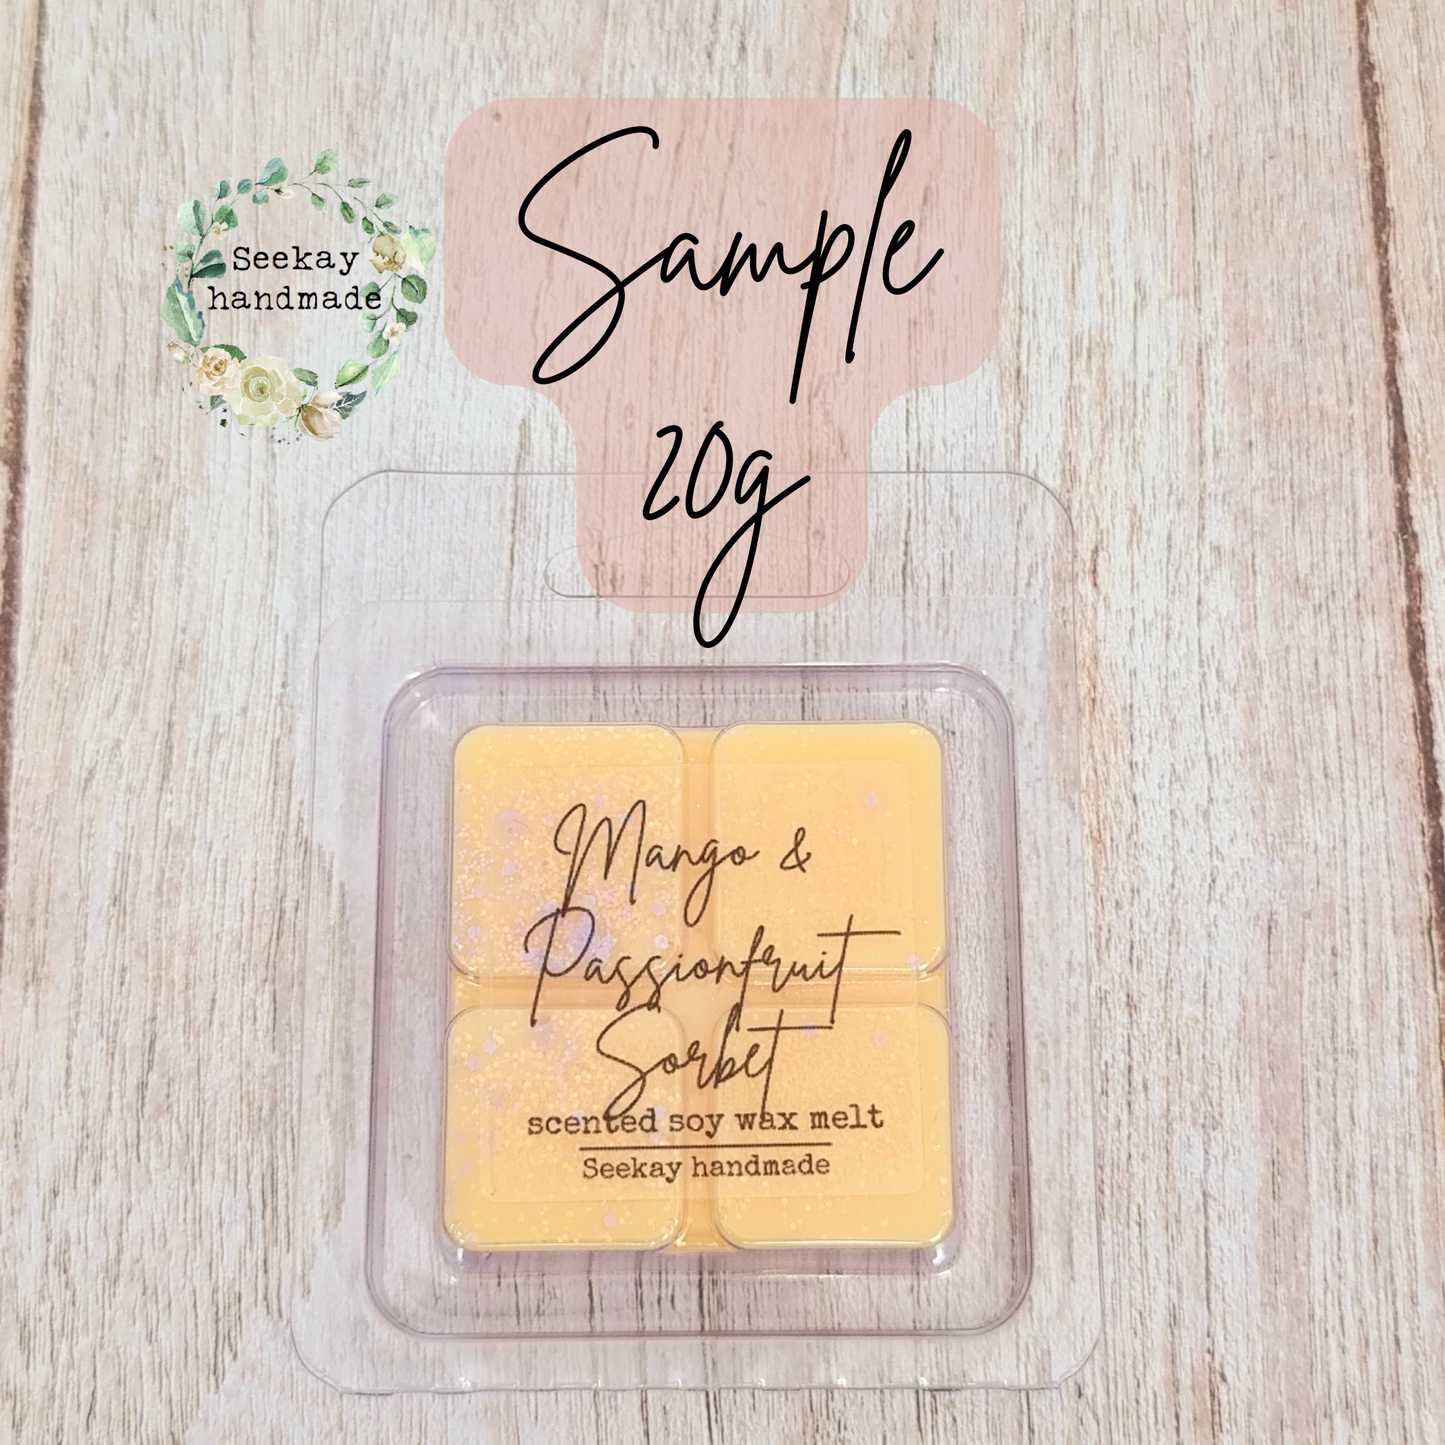 Mango & Passionfruit Sorbet scented soy wax melt